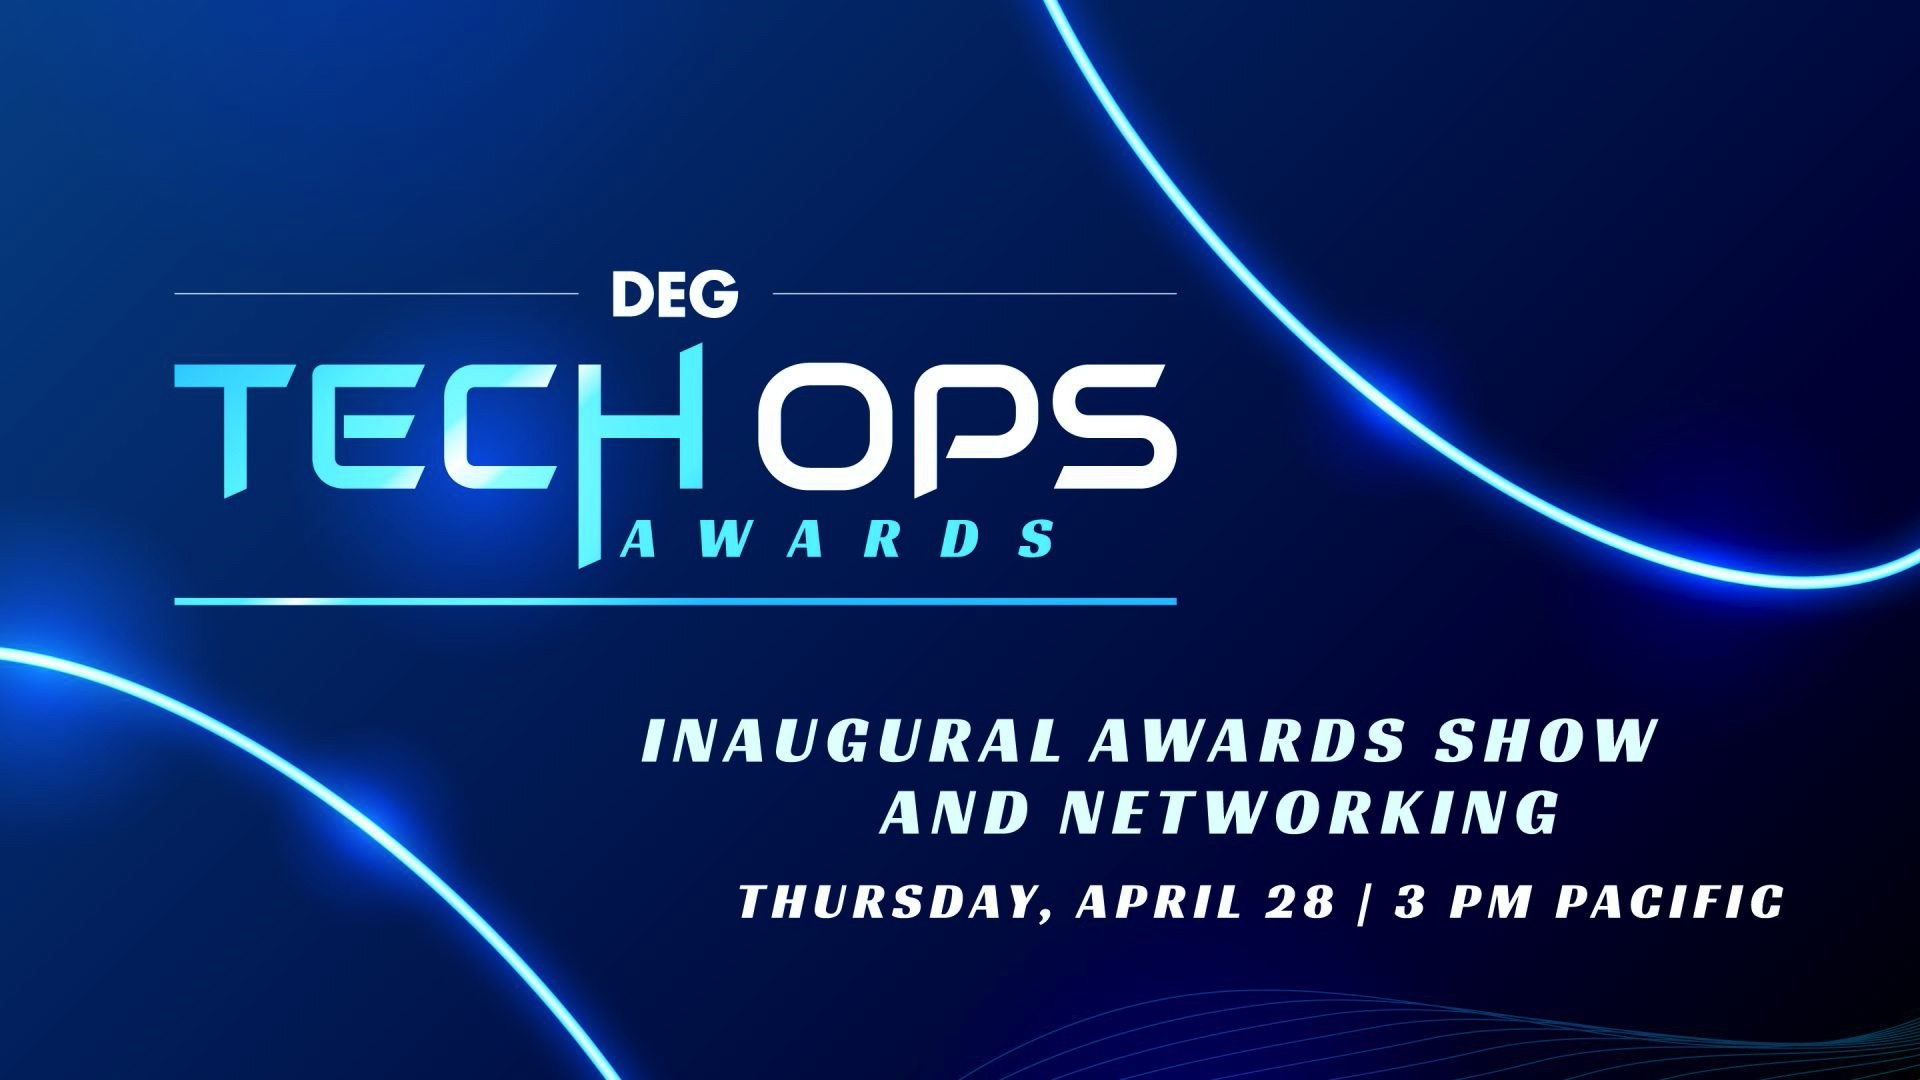 MovieLabs, and its staff, are honored to be shortlisted for several DEG TechOps Awards.